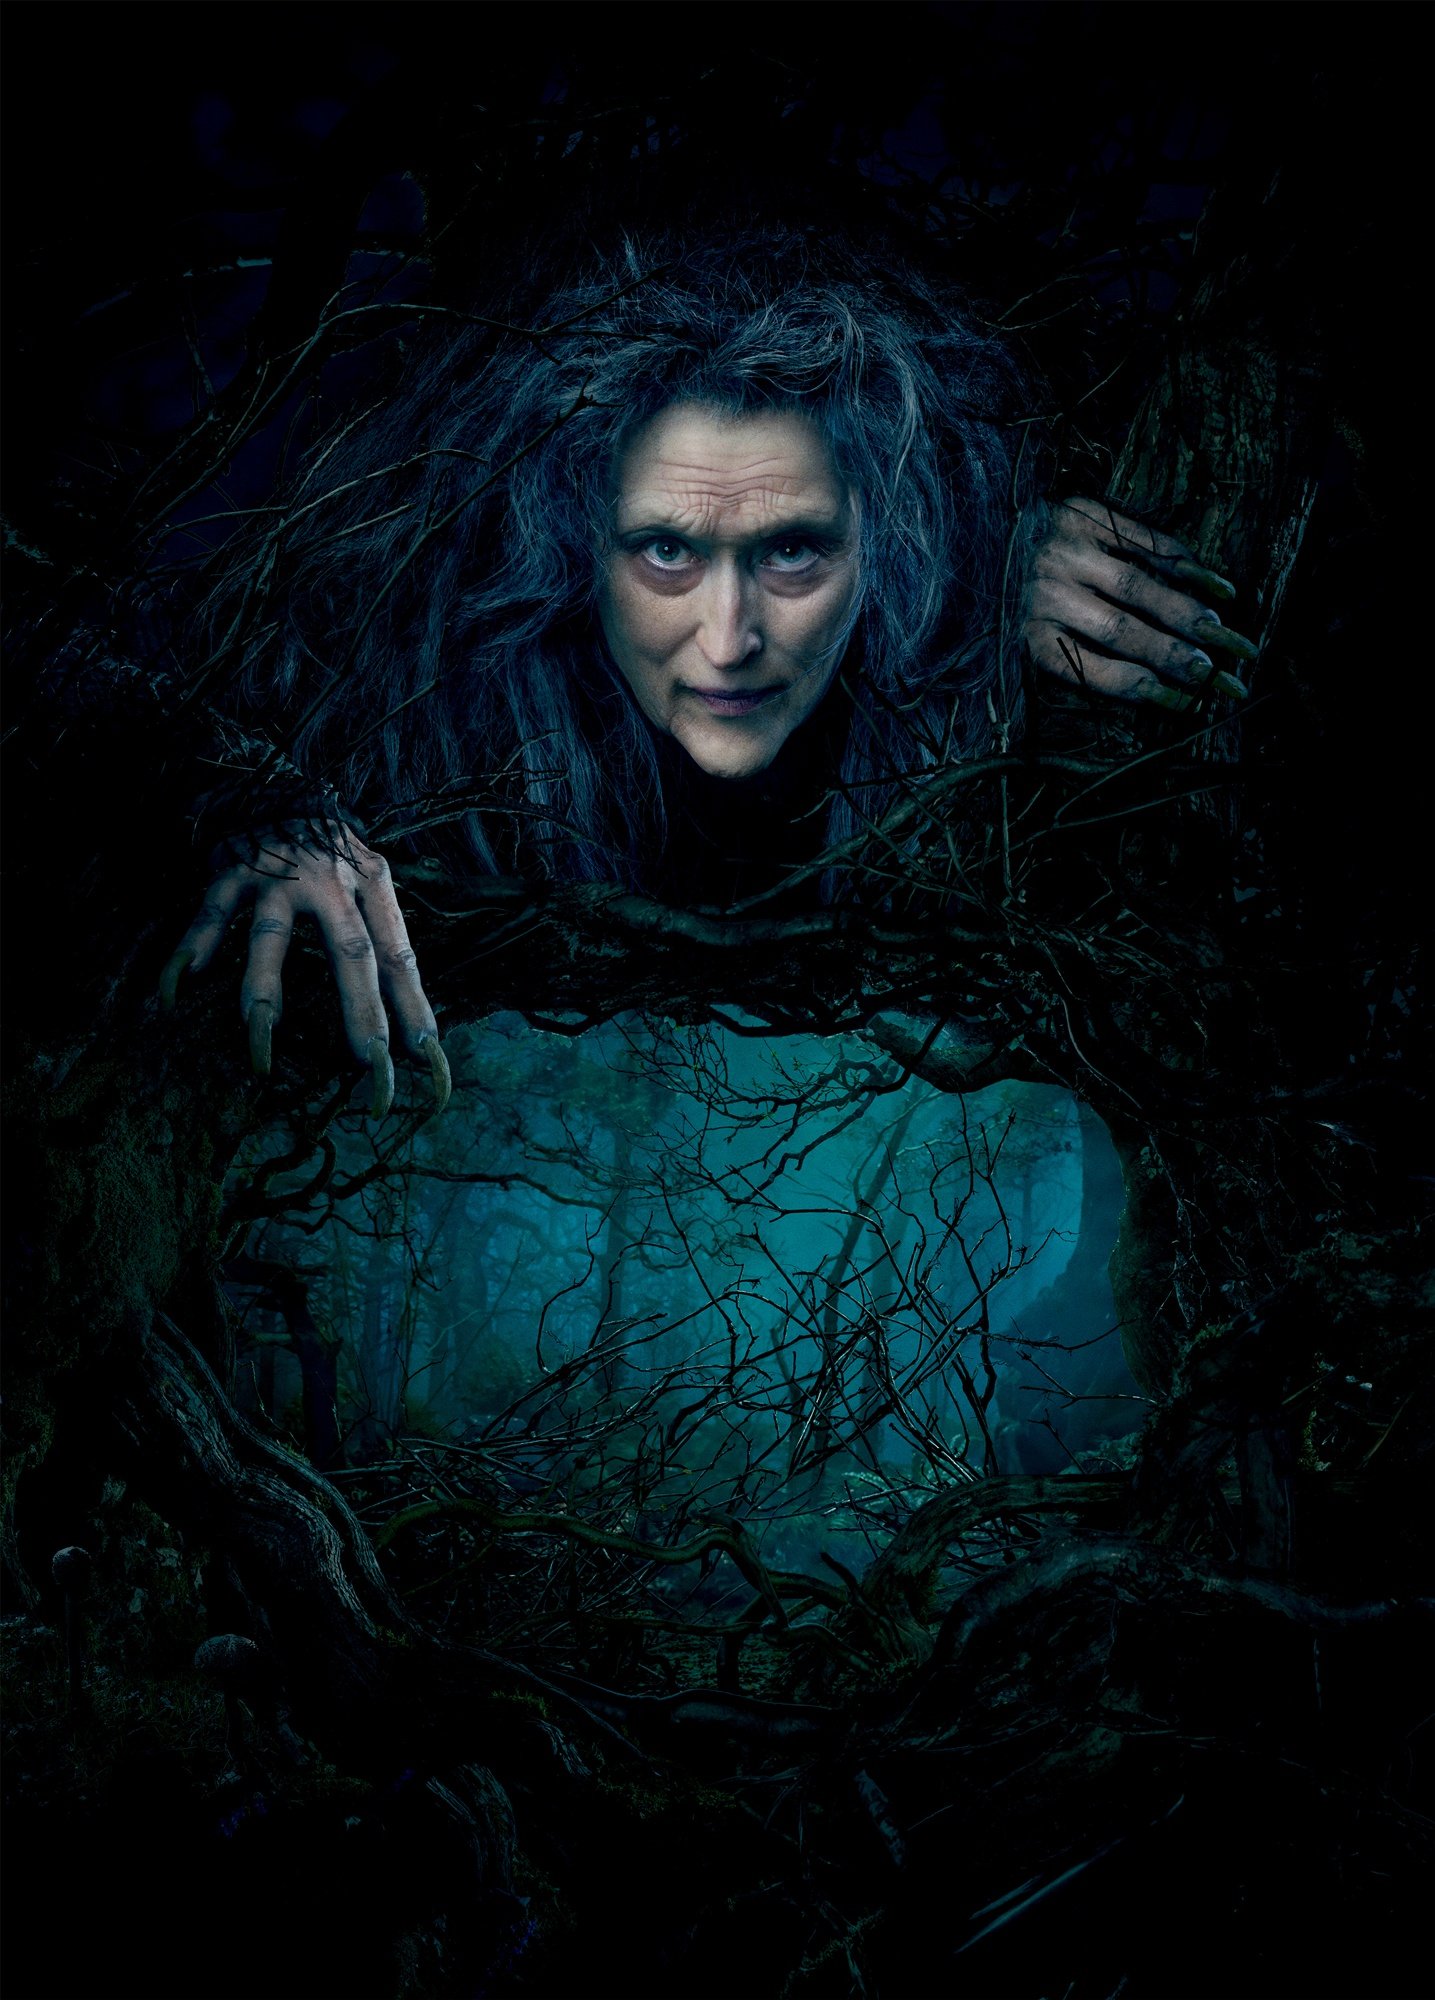 Meryl Streep stars as The Witch in Walt Disney Pictures' Into the Woods (2014)